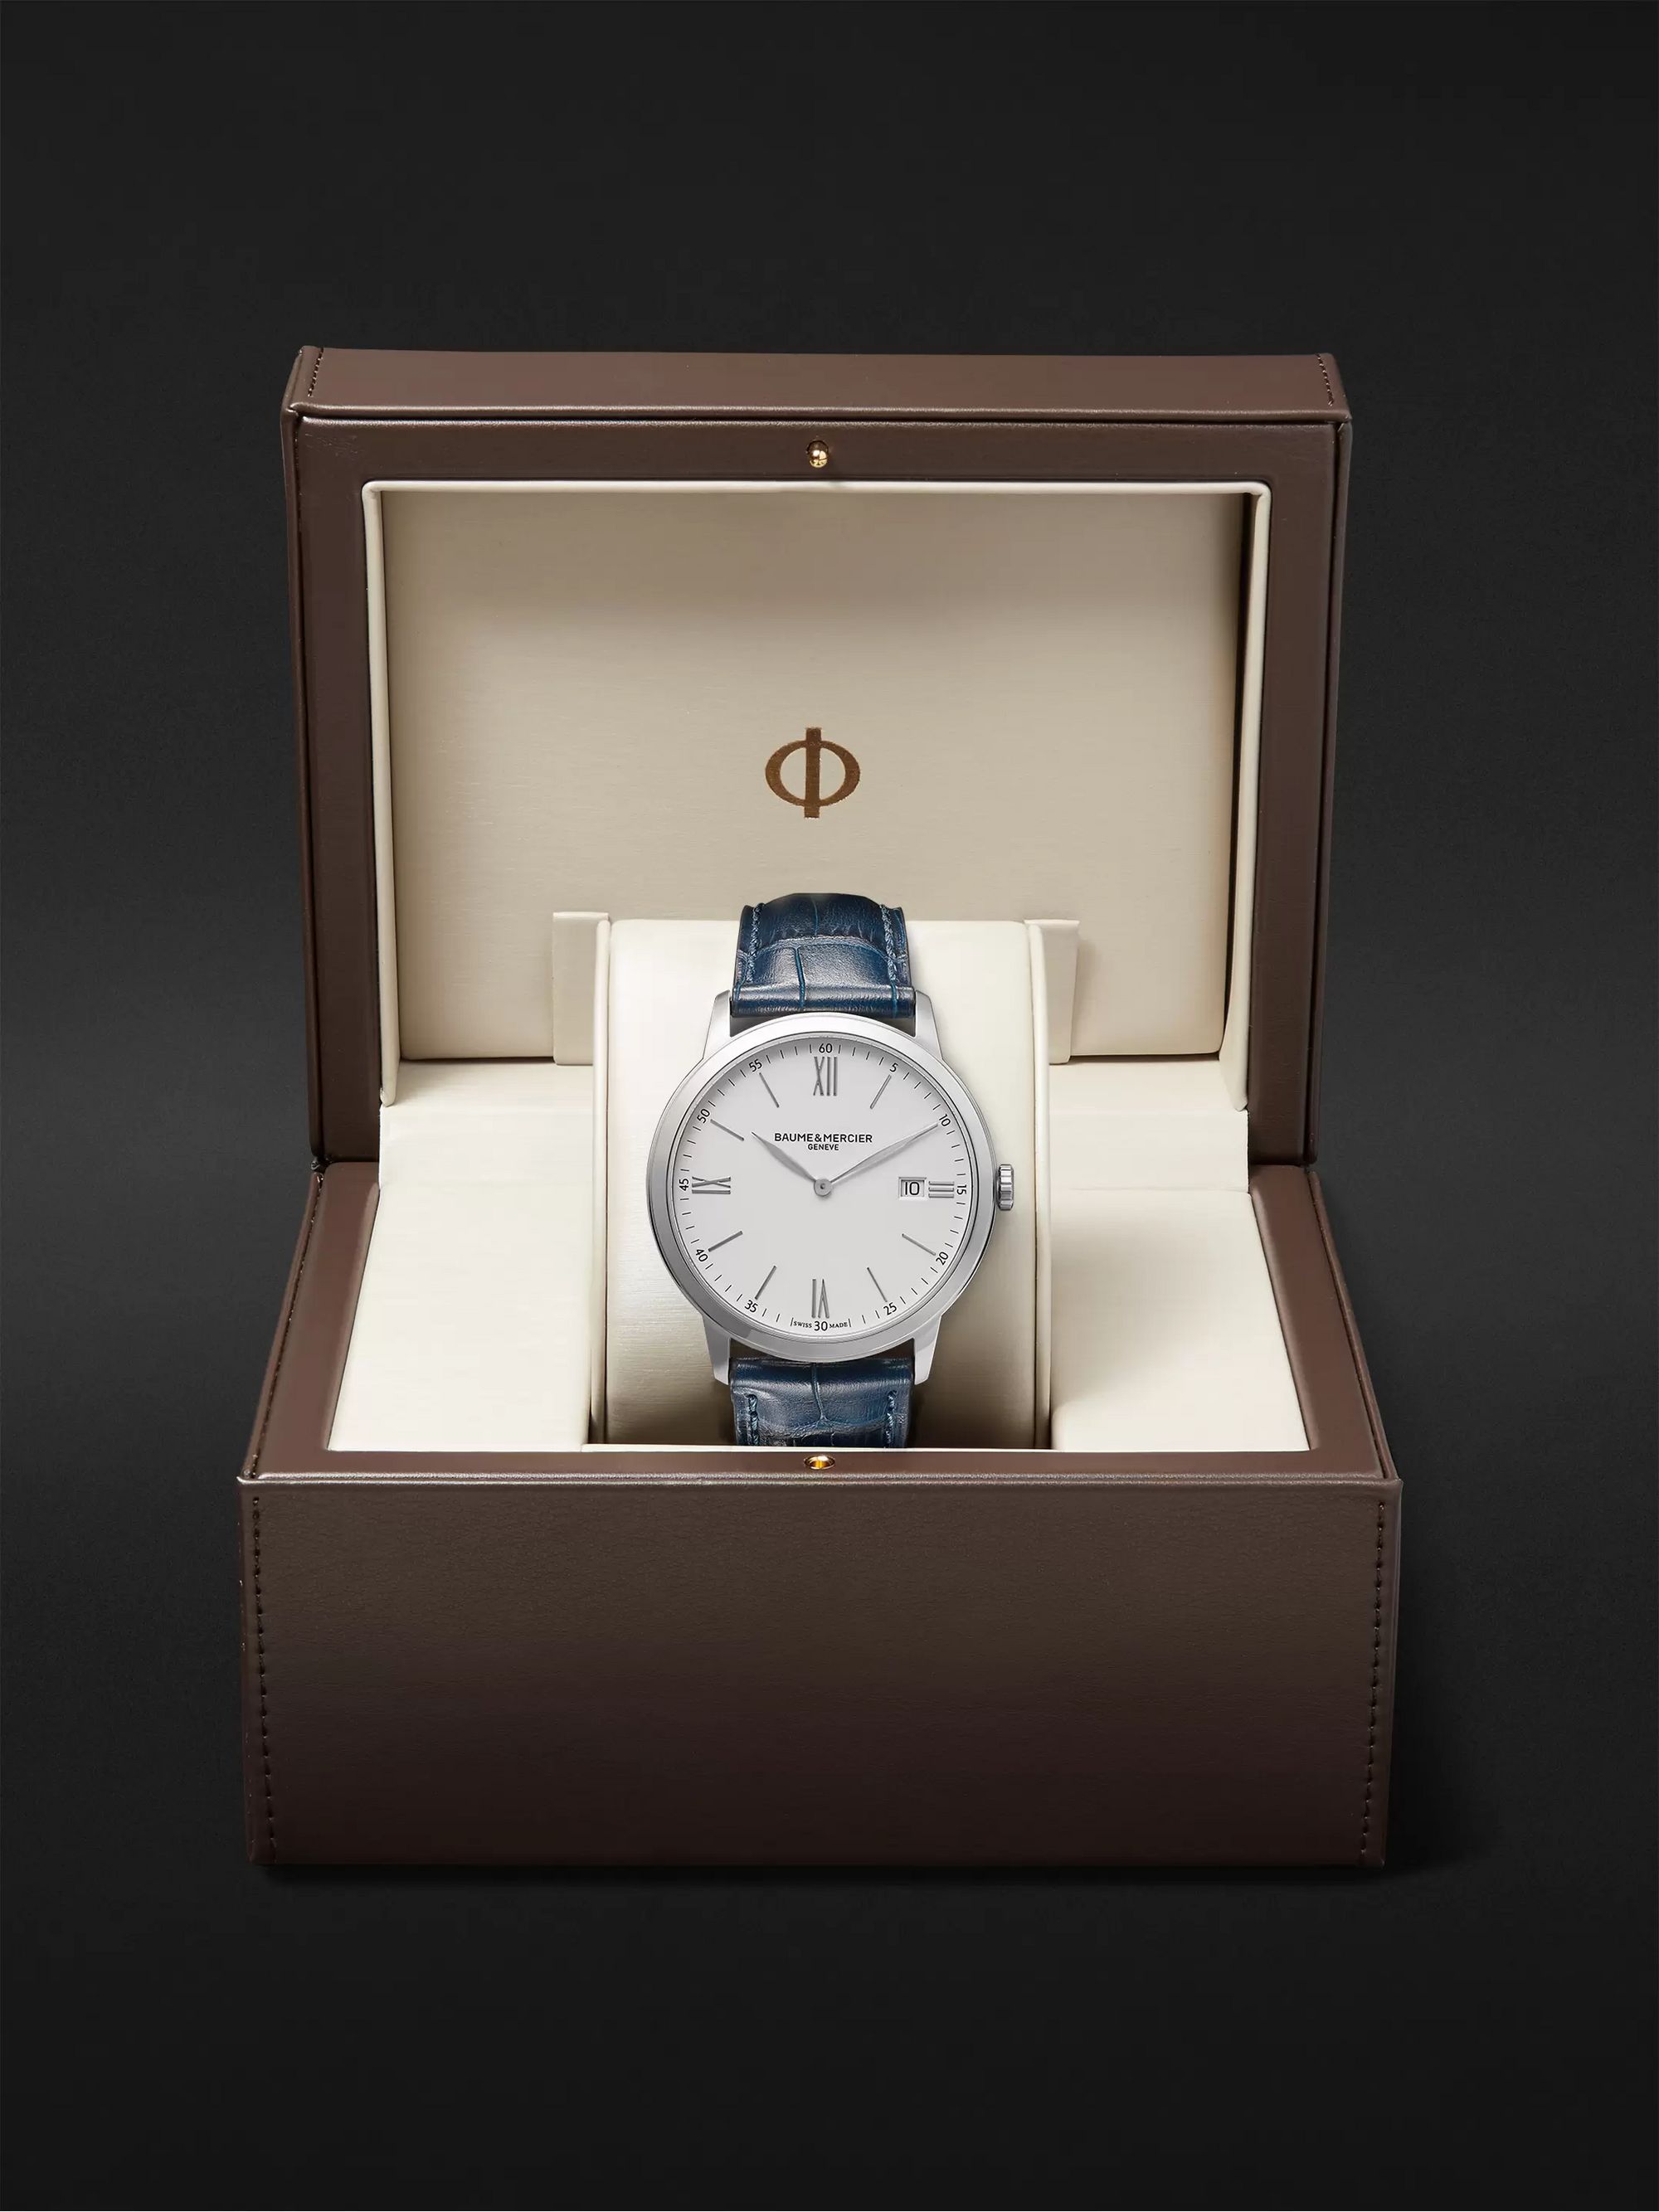 BAUME & MERCIER Classima 40mm Steel and Croc-Effect Leather Watch, Ref. No. 10508